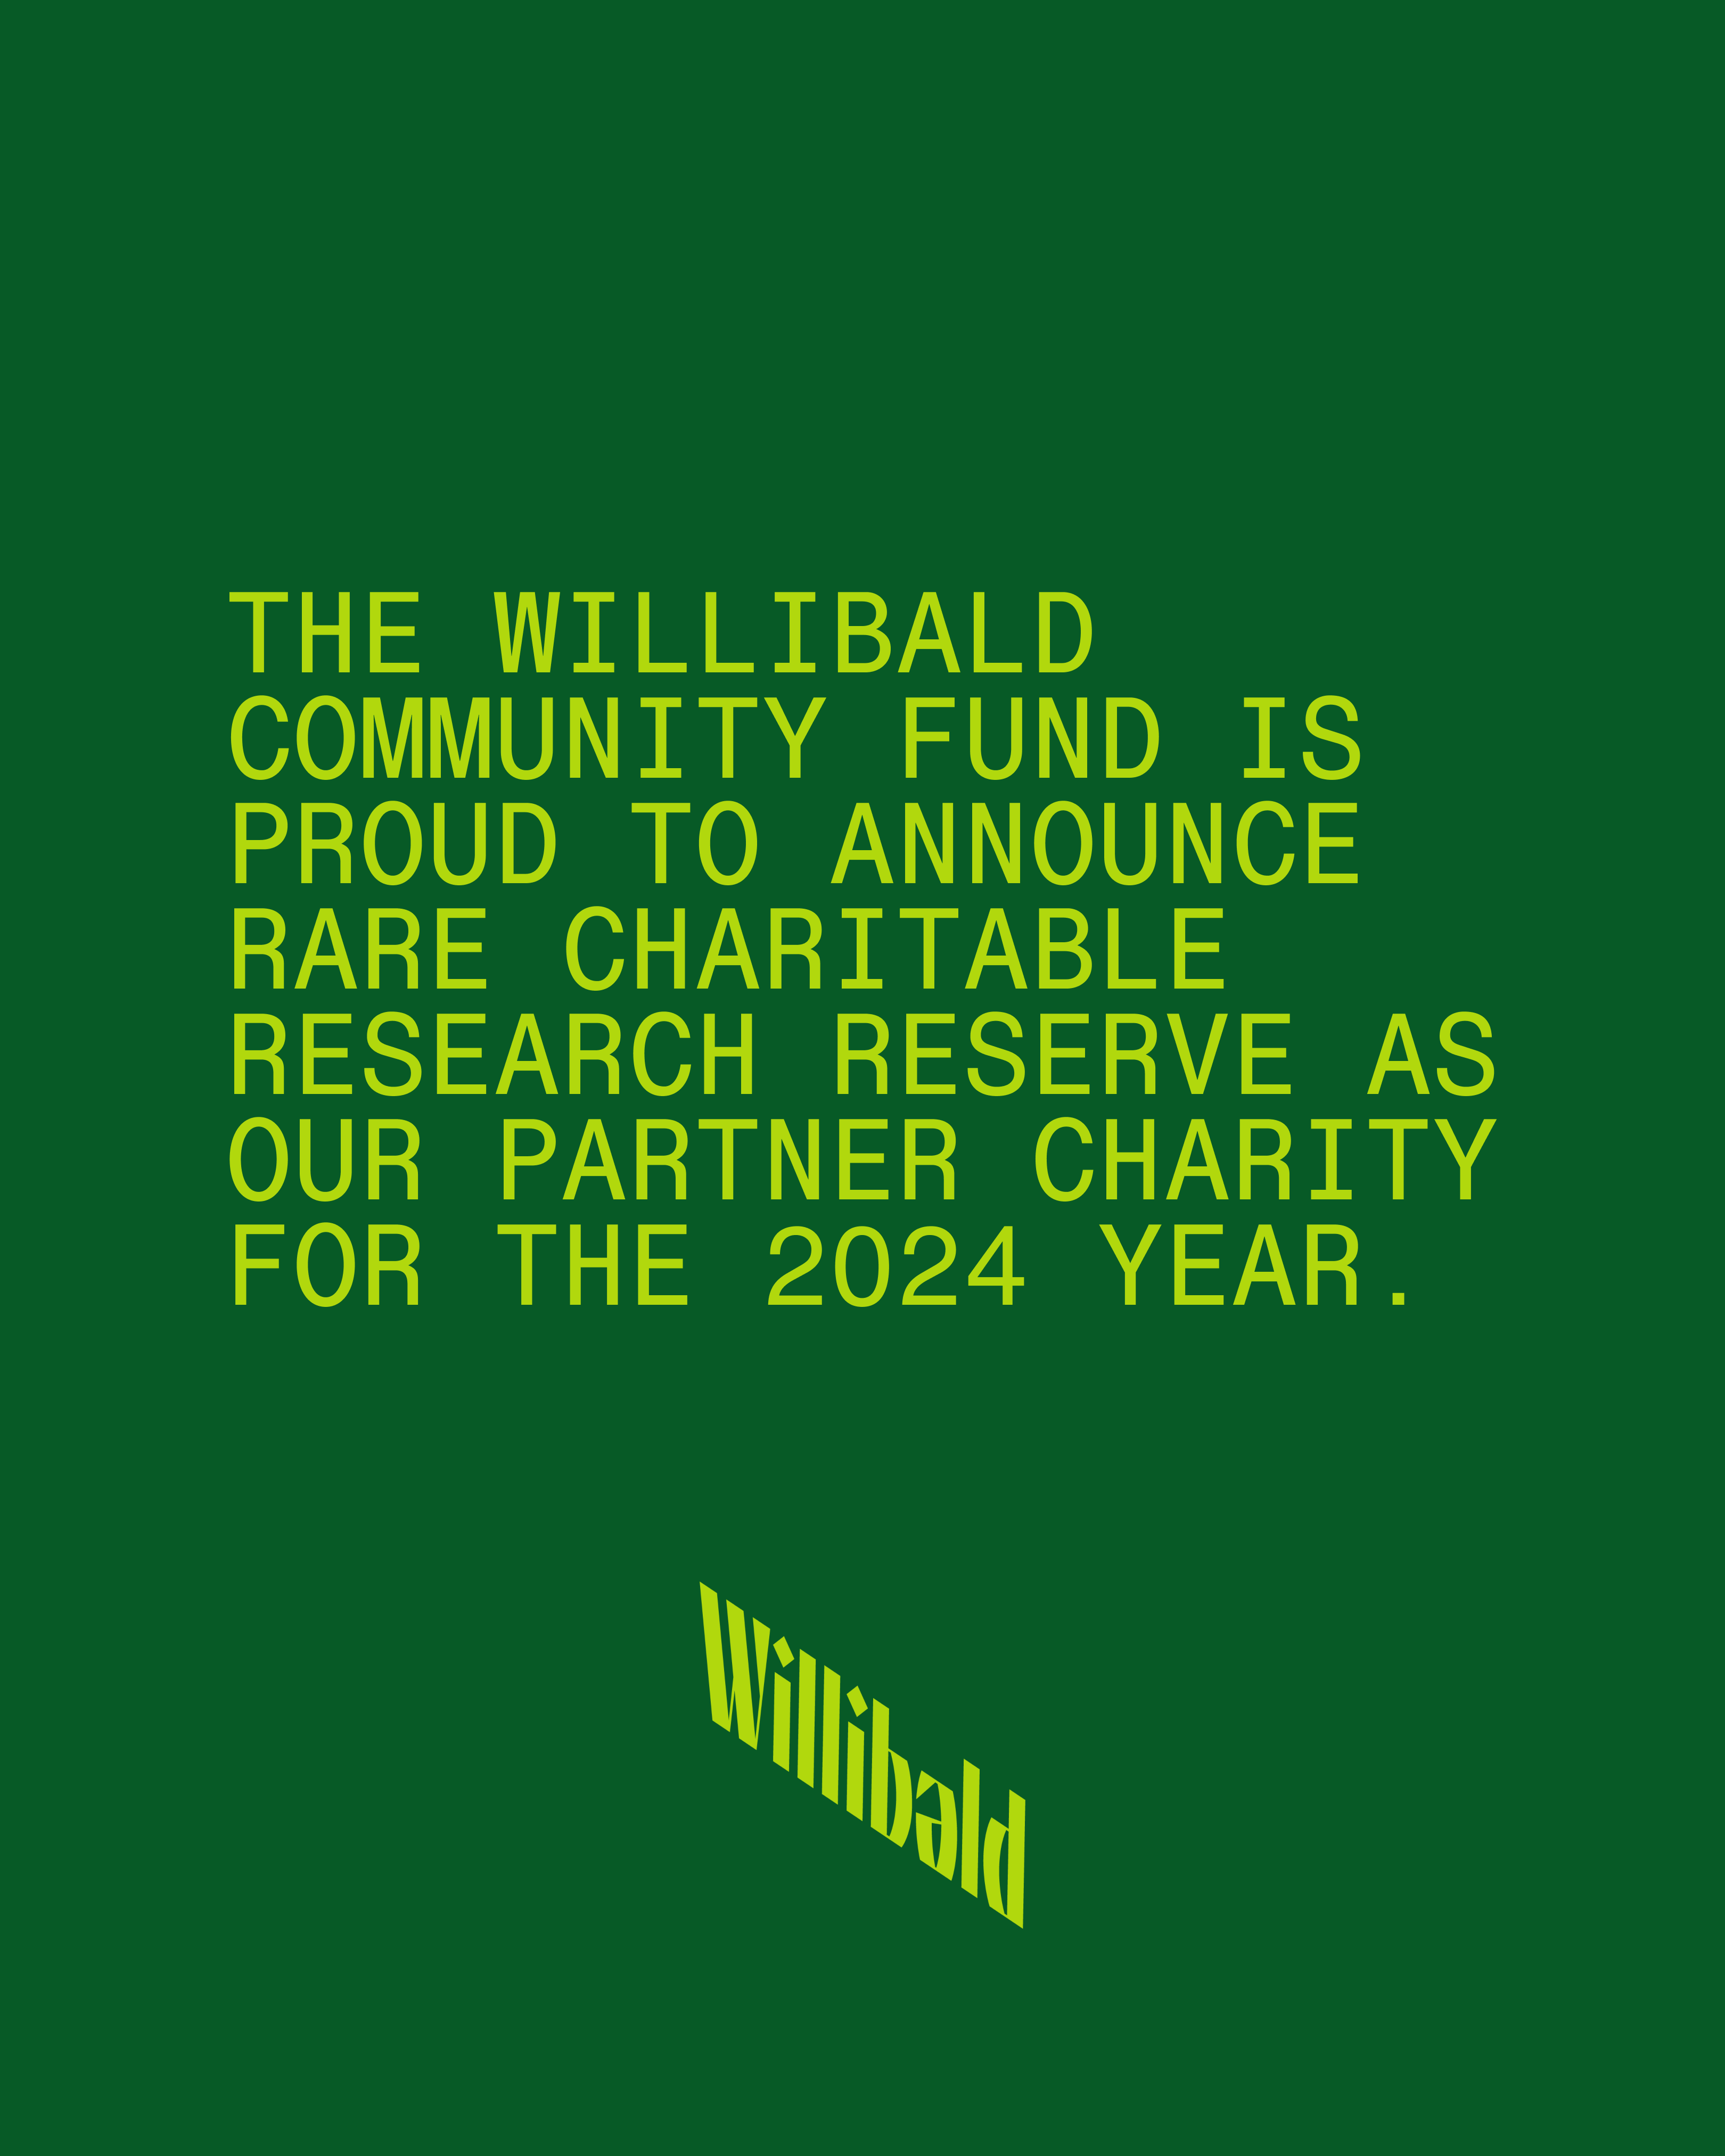 We're proud to announce our 2024 Willibald Community Fund Partner